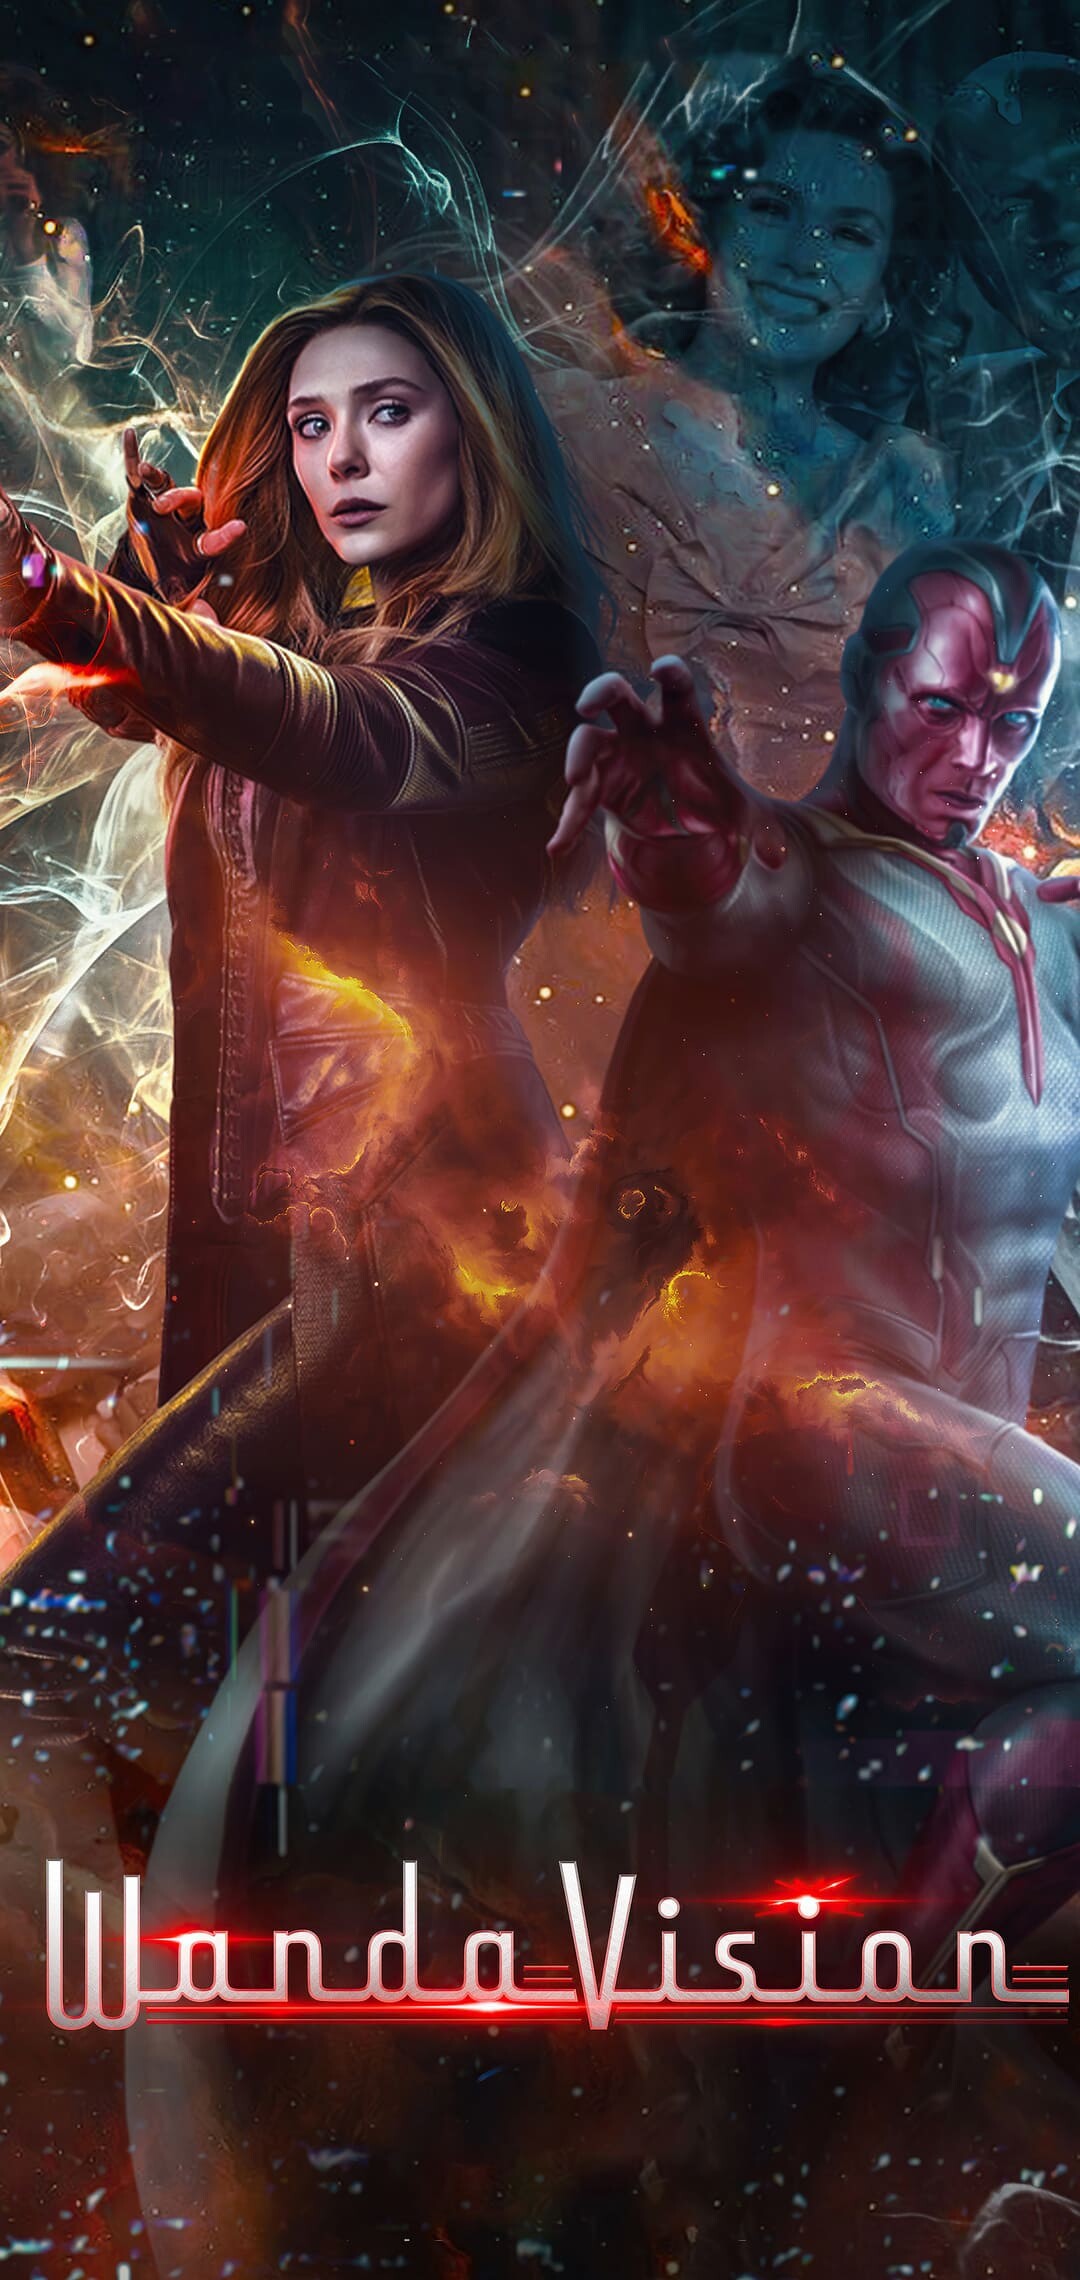 WandaVision: Elizabeth Olsen as Scarlet Witch and Paul Bettany as Vision. 1080x2280 HD Wallpaper.